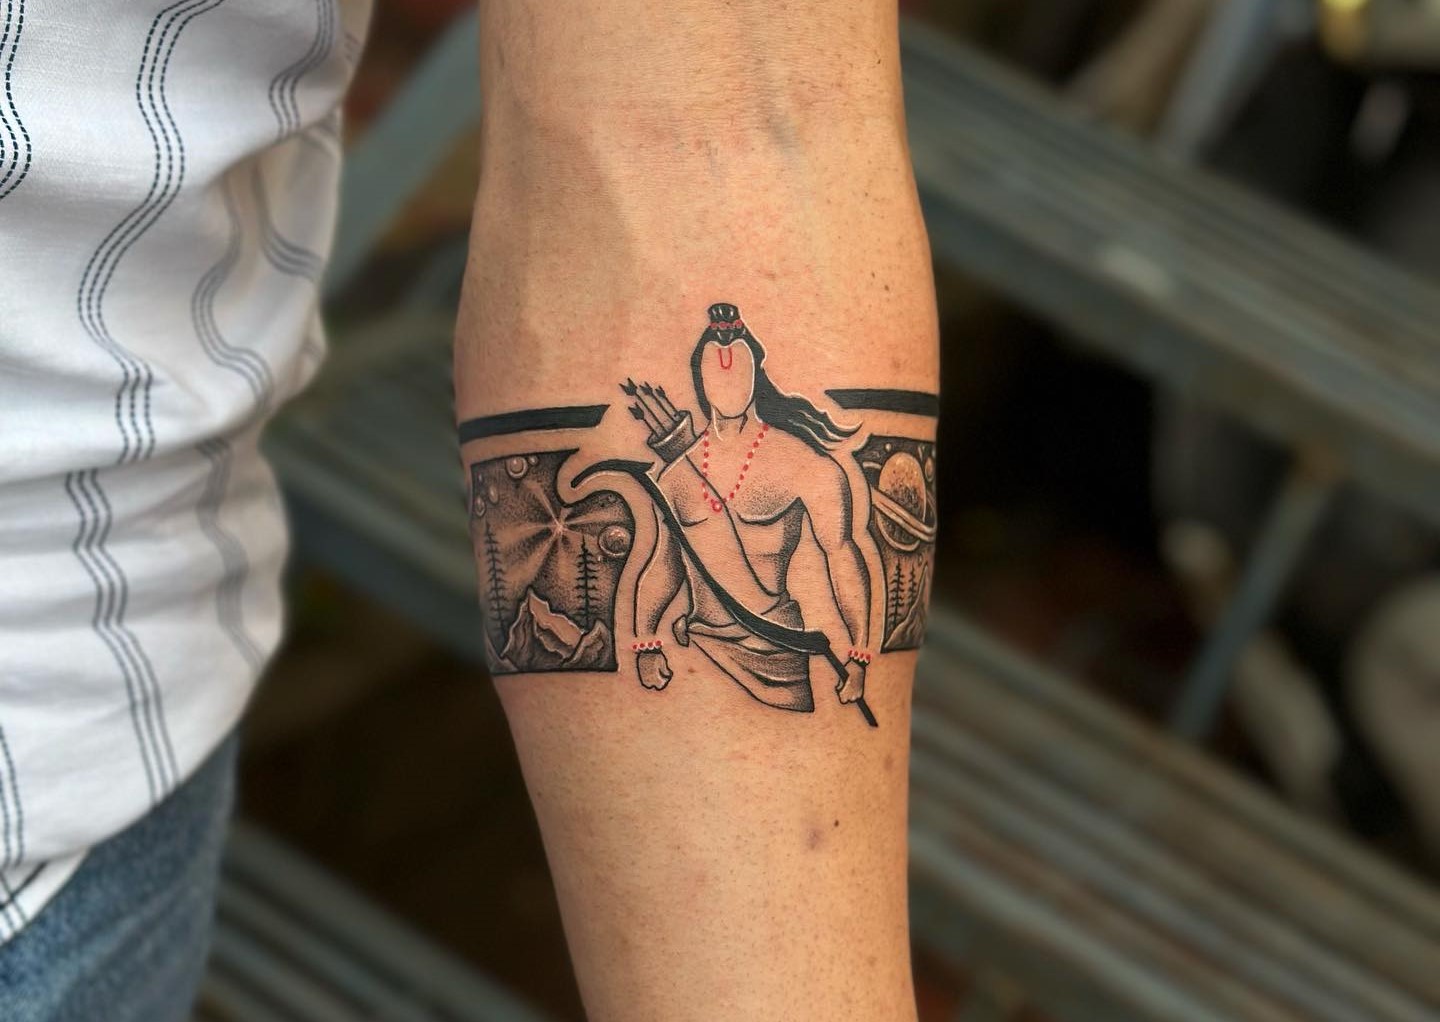 Hide N Seek Tattoo Studio - The swastika symbol, 卐 or 卍, is an ancient  religious icon in the cultures. It is used as a symbol of divinity and  spirituality in Indian